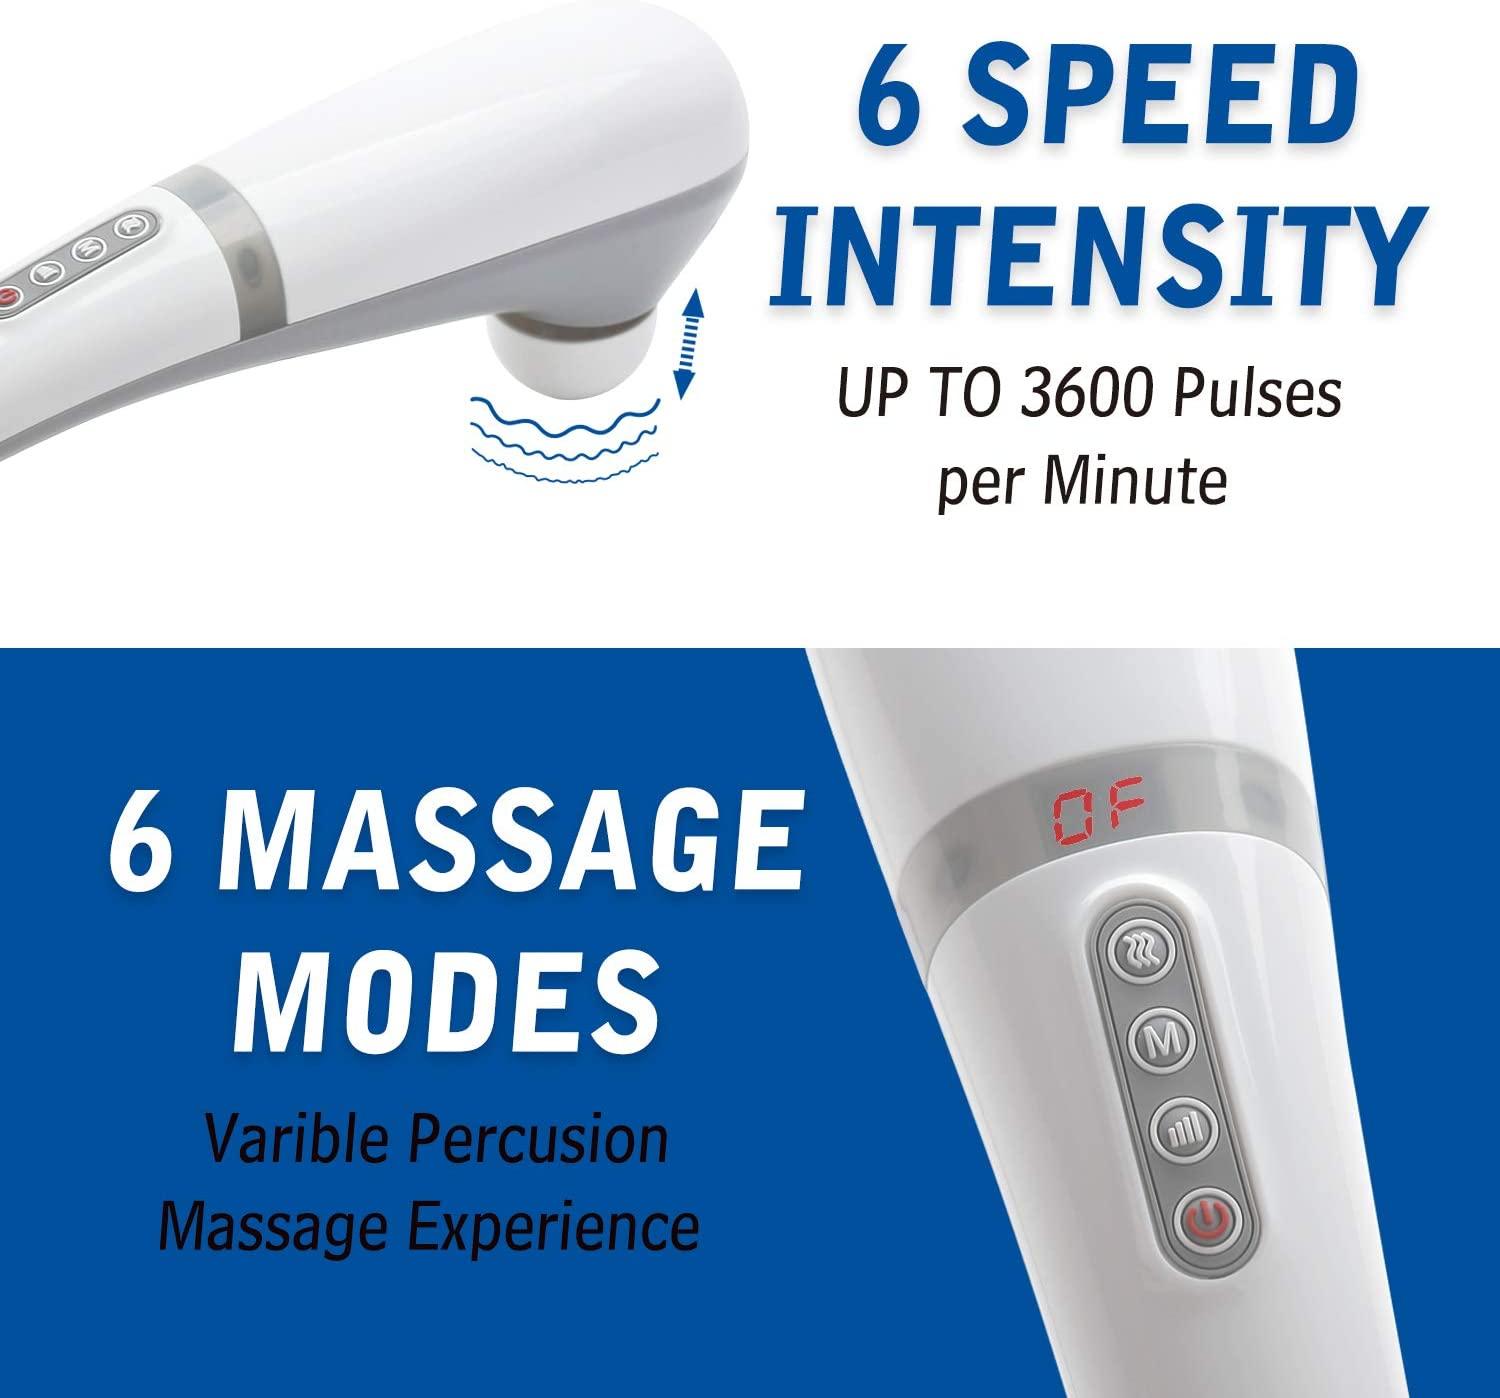 Back Massager Cordless Handheld Back Massager Handheld Electric Heat Deep  Kneading Tissue For Full Body Pain Relief